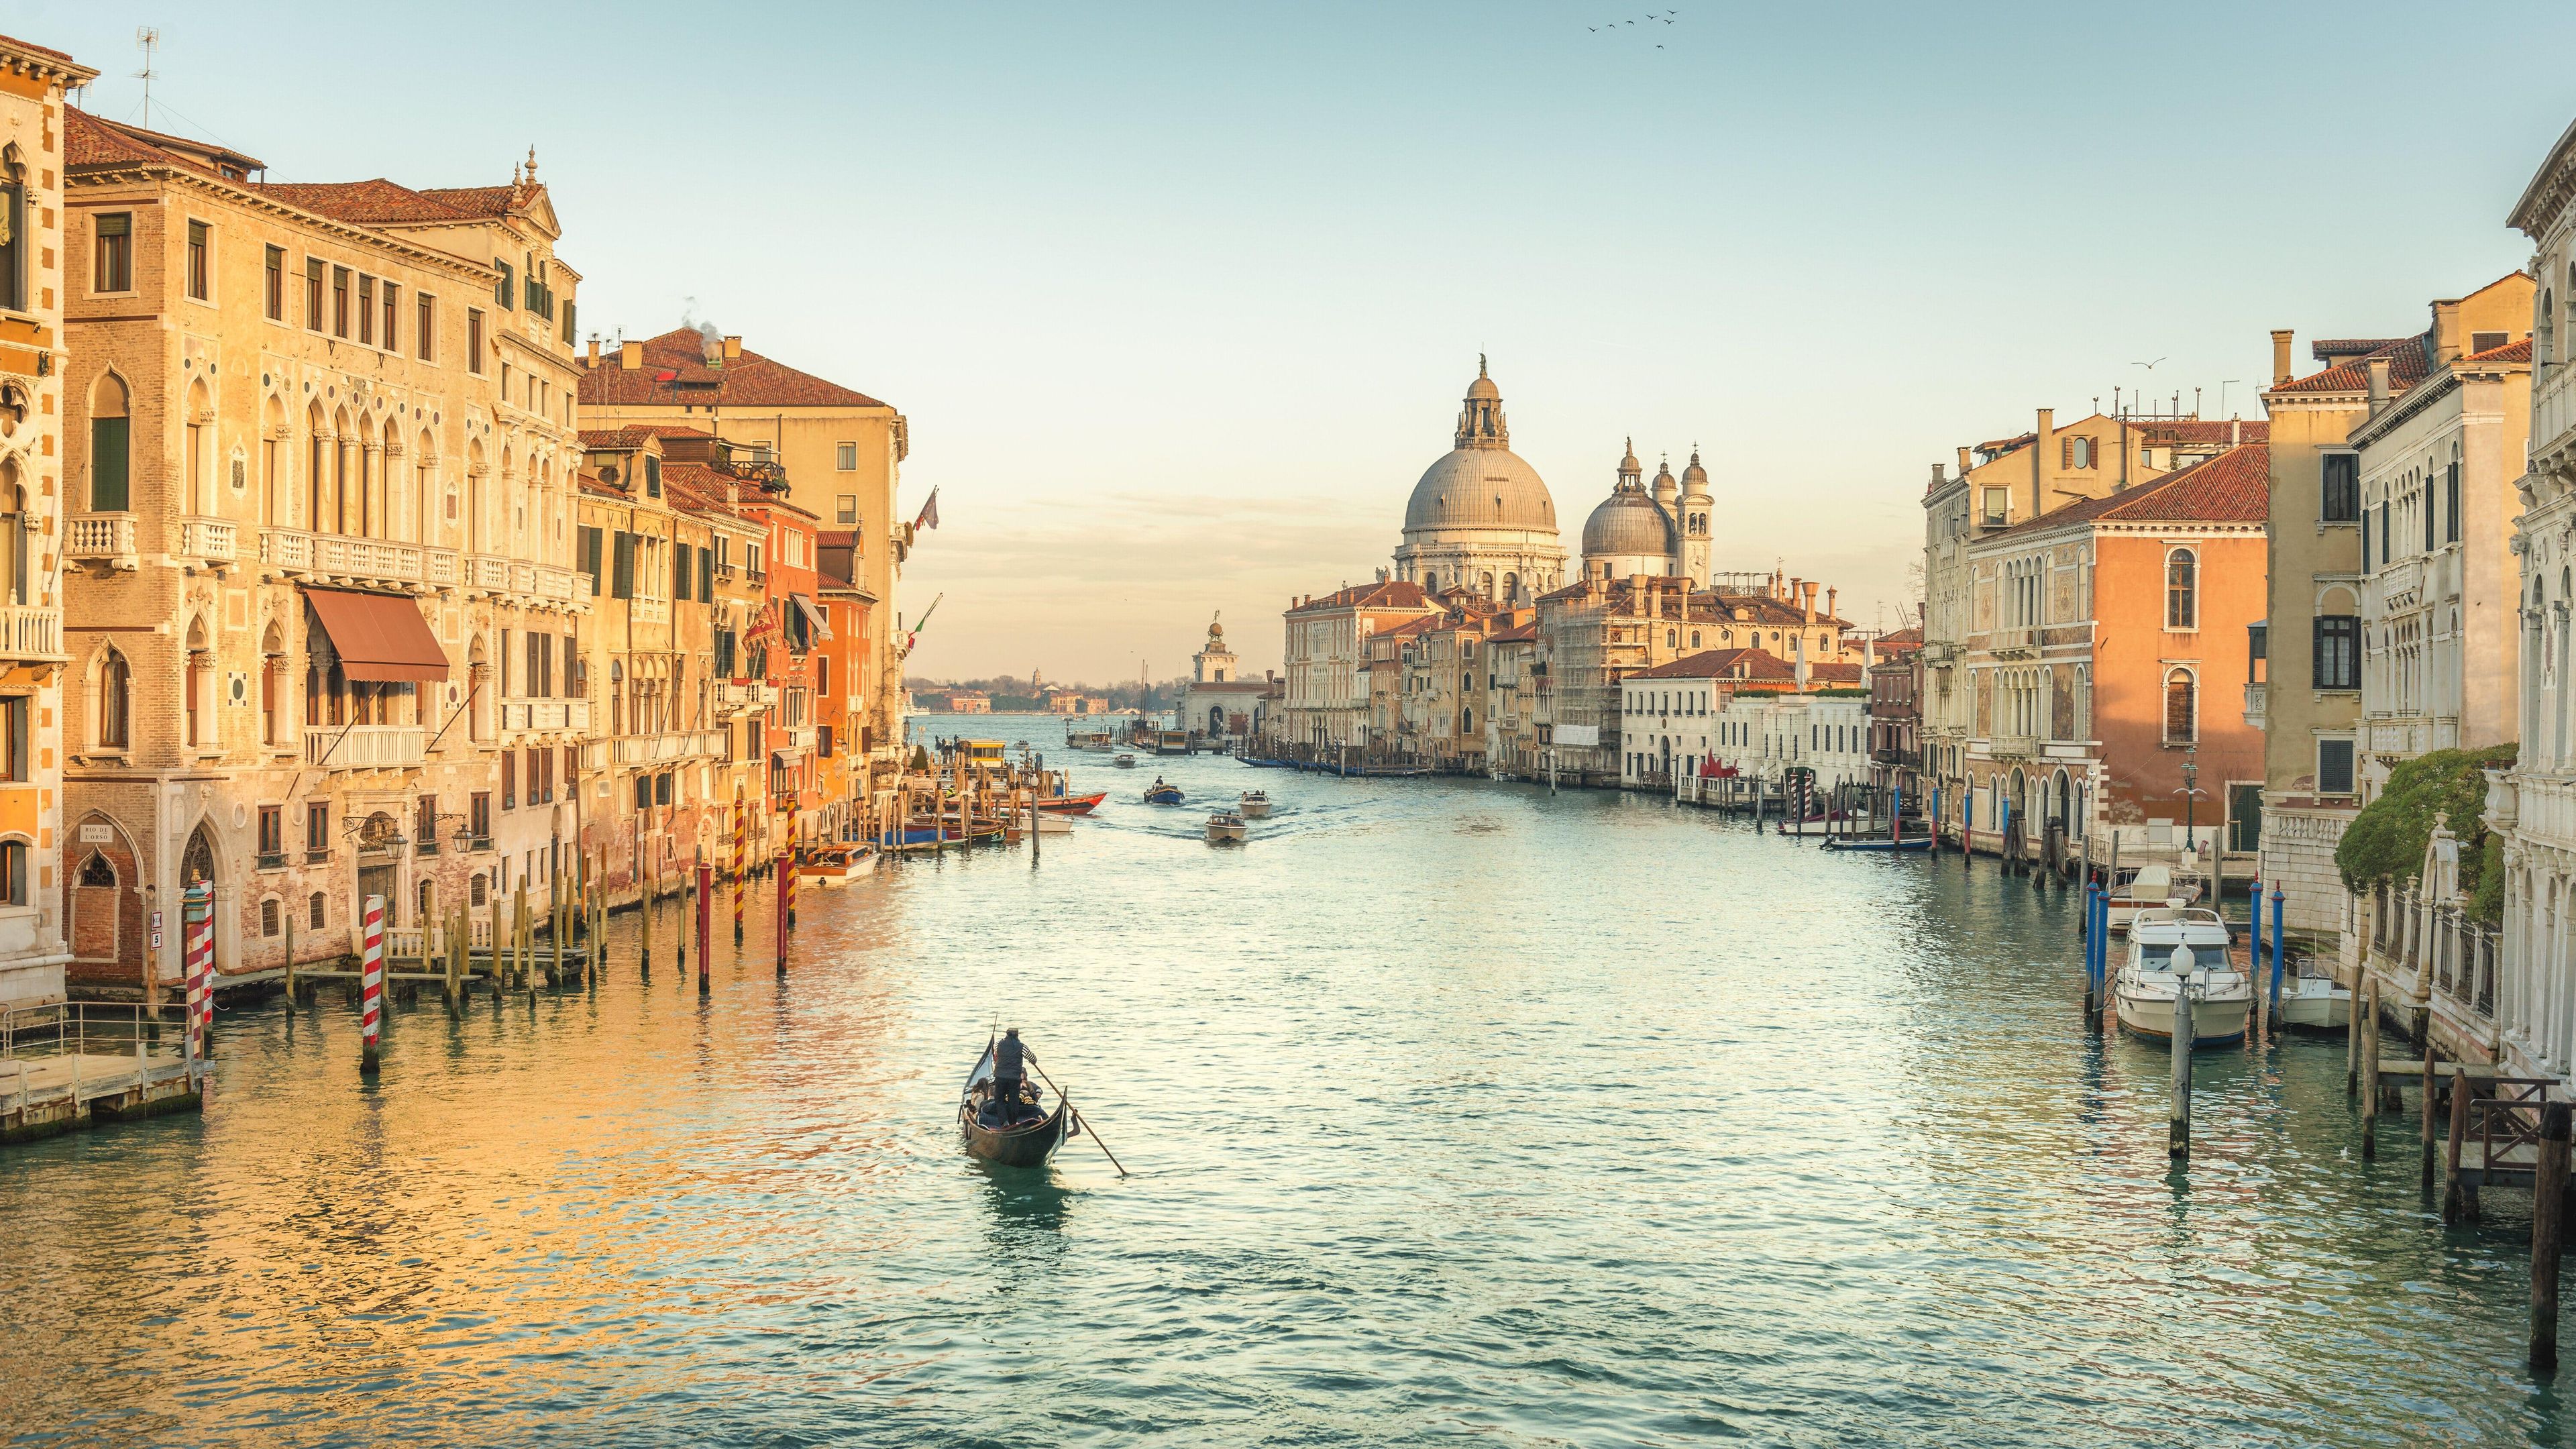 The Grand Canal in Venice at sunset.